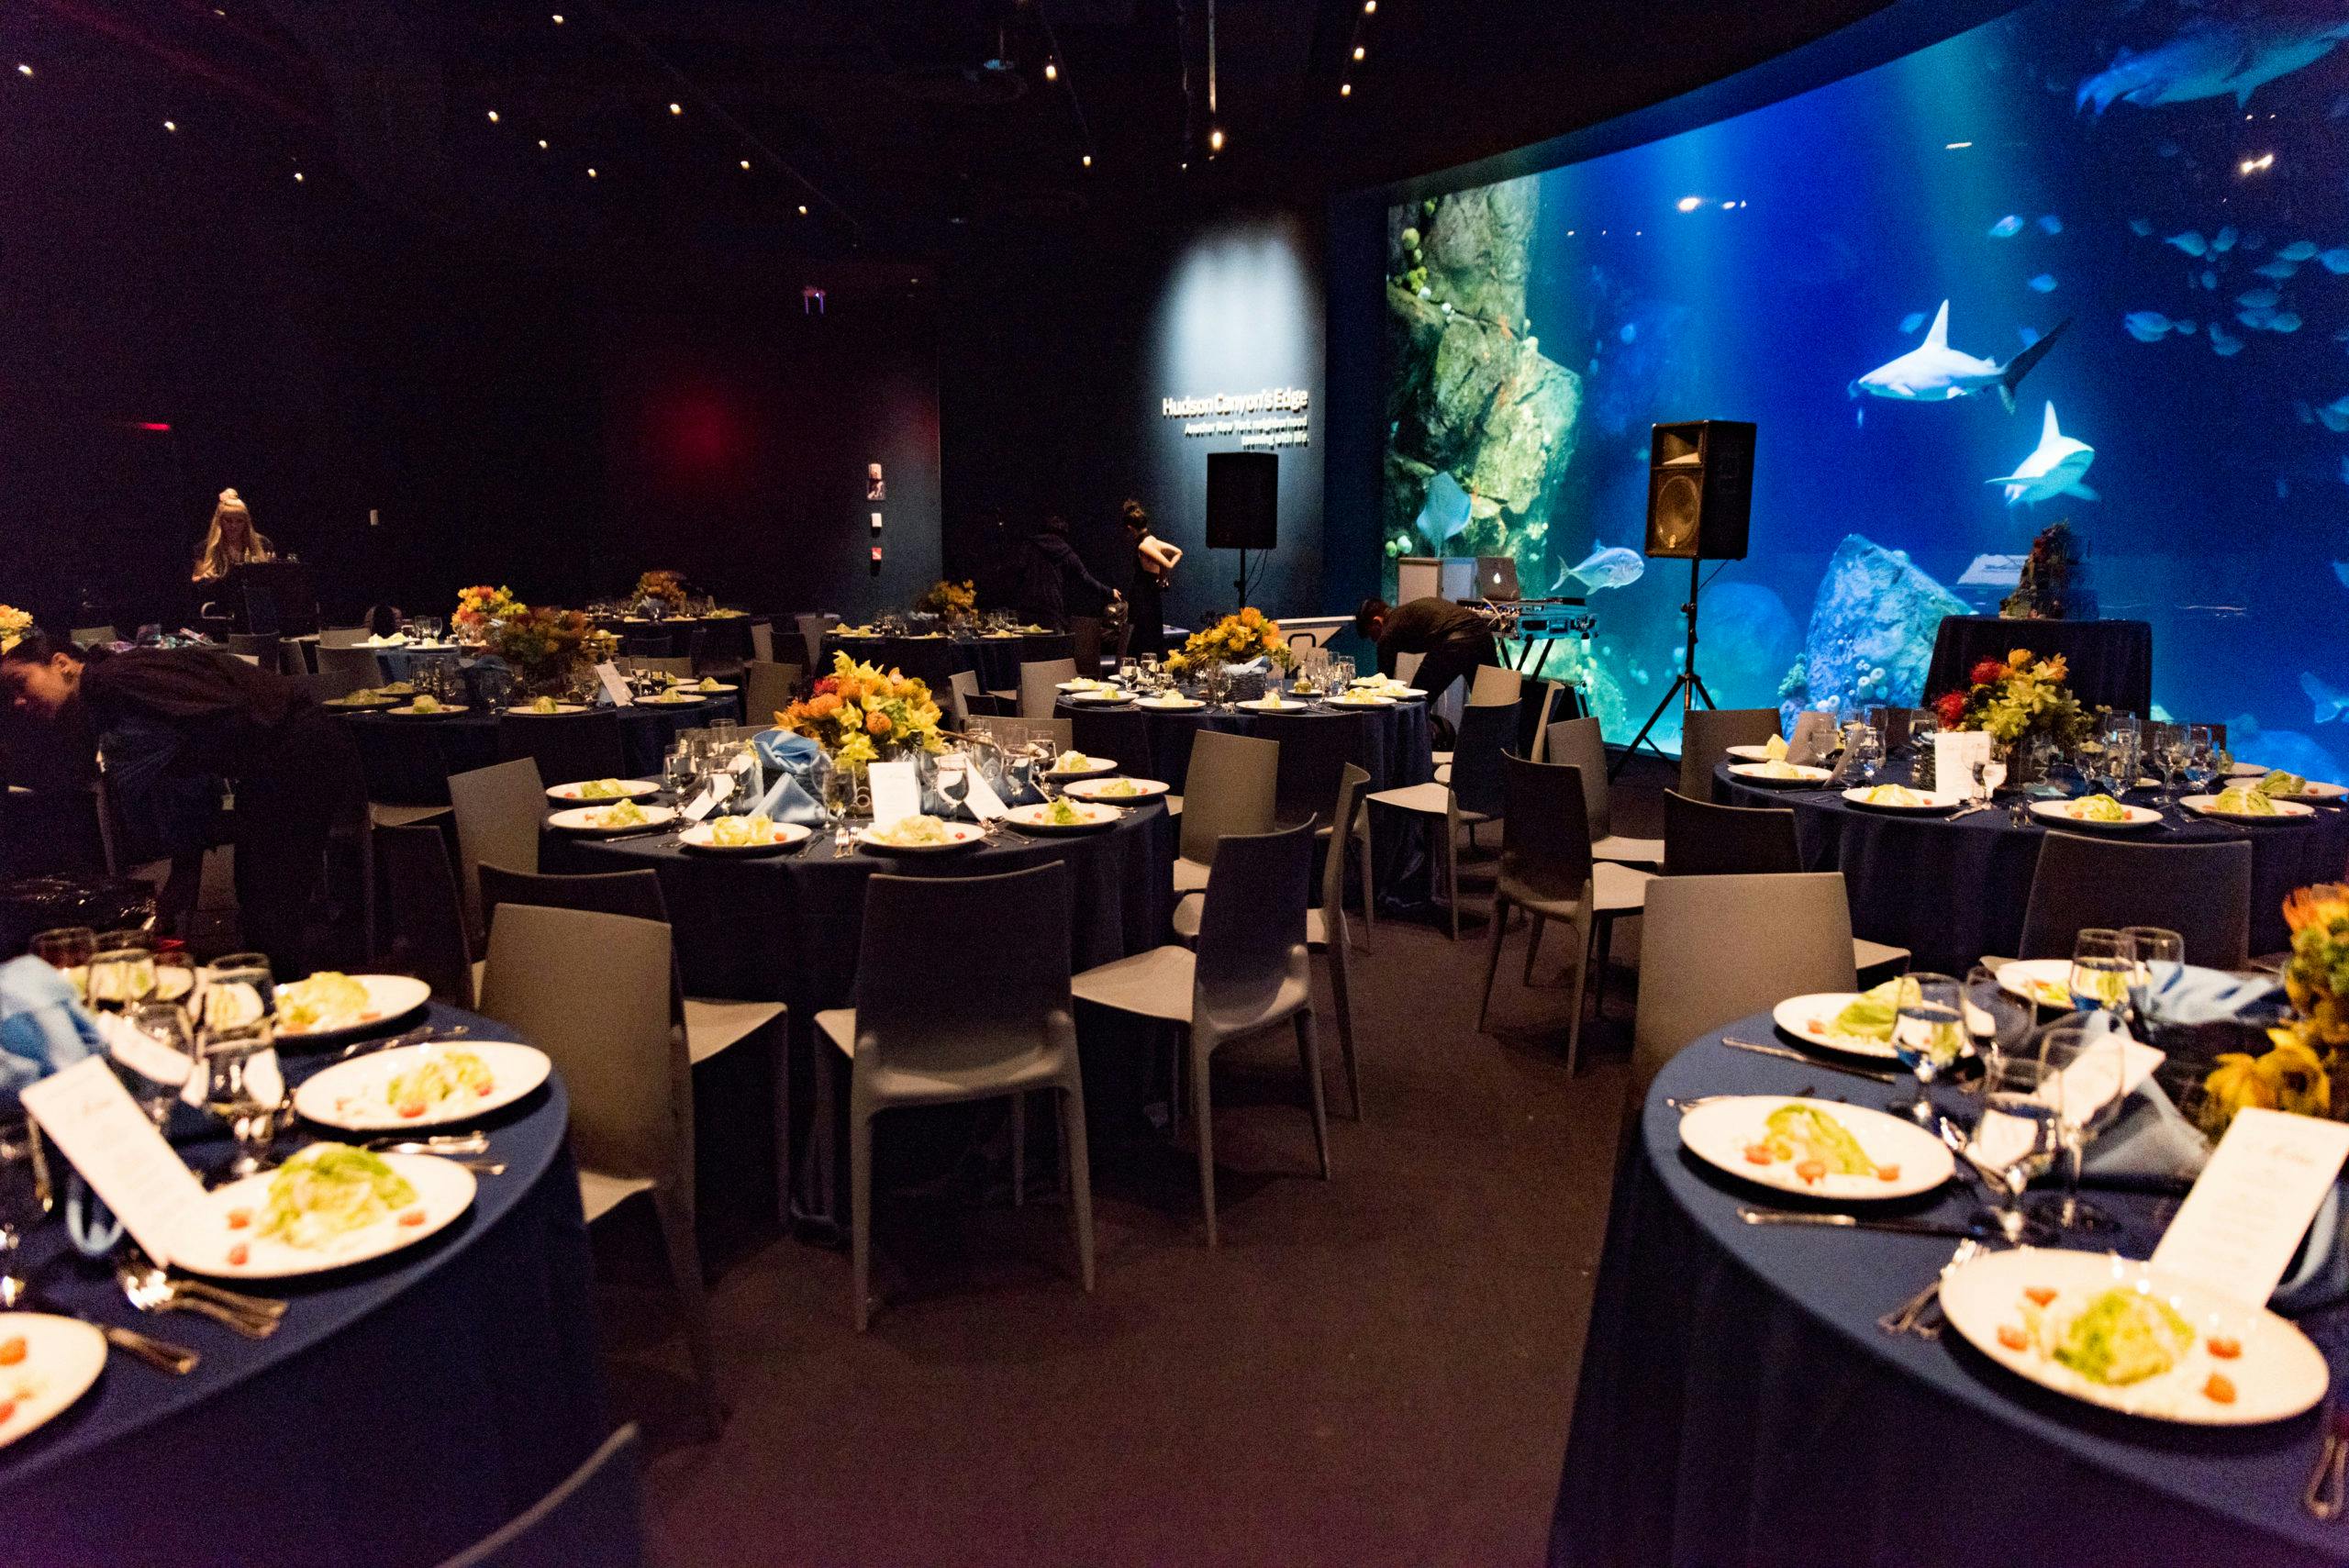 Kids First Birthday at the New York Aquarium Underwater Extravaganza with Sea Creatures Swimming By the Glass Windows and Tables Laid with Black Table Cloths | PartySlate